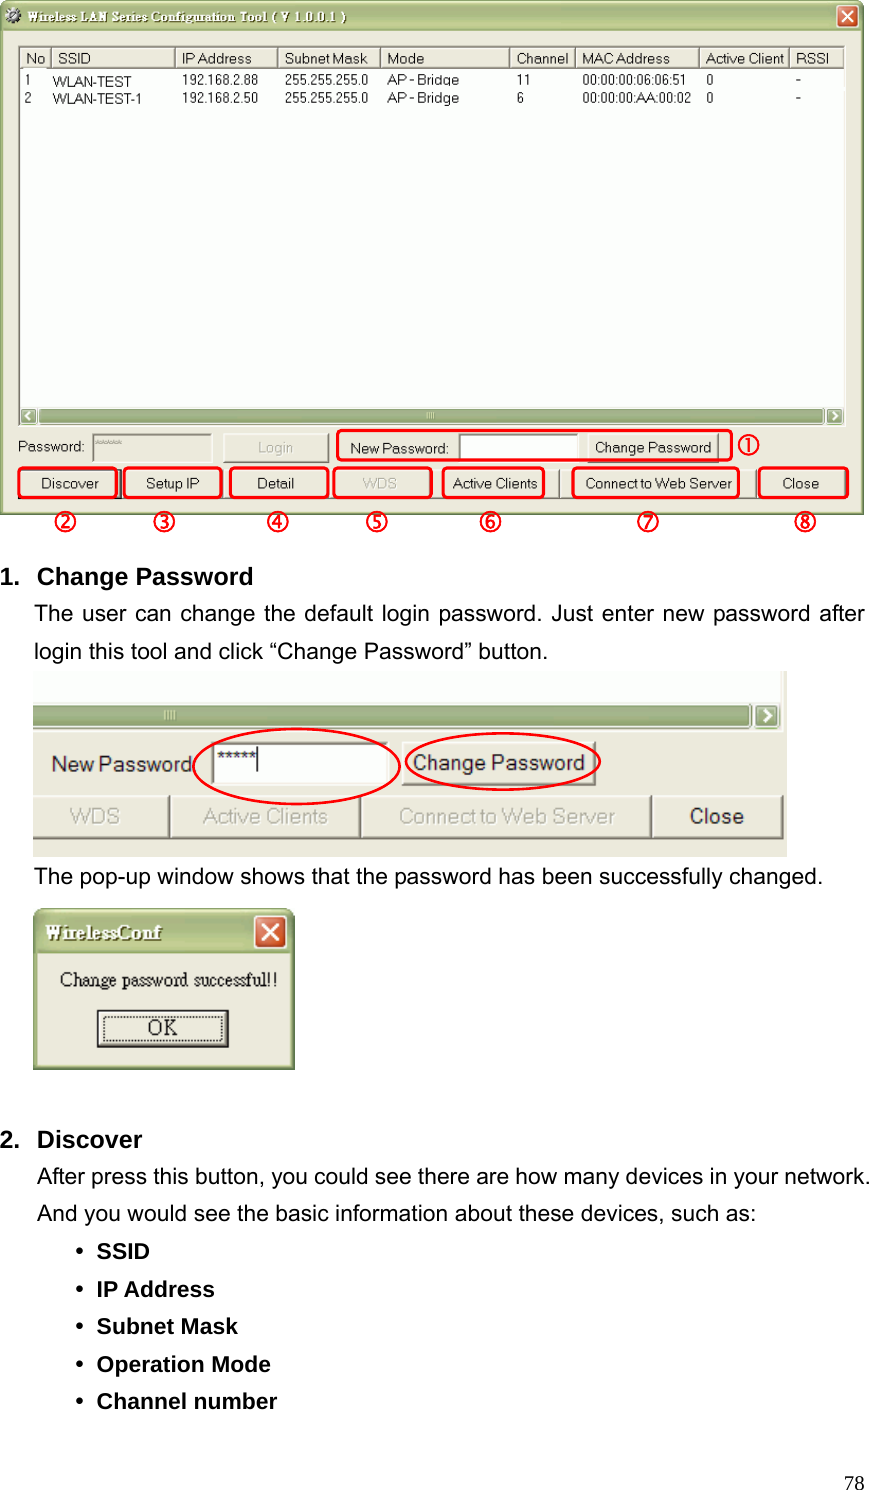  78 1. Change Password The user can change the default login password. Just enter new password after login this tool and click “Change Password” button.    The pop-up window shows that the password has been successfully changed.   2. Discover After press this button, you could see there are how many devices in your network. And you would see the basic information about these devices, such as: y SSID y IP Address y Subnet Mask y Operation Mode y Channel number d     e      f     g      h         i         j c 